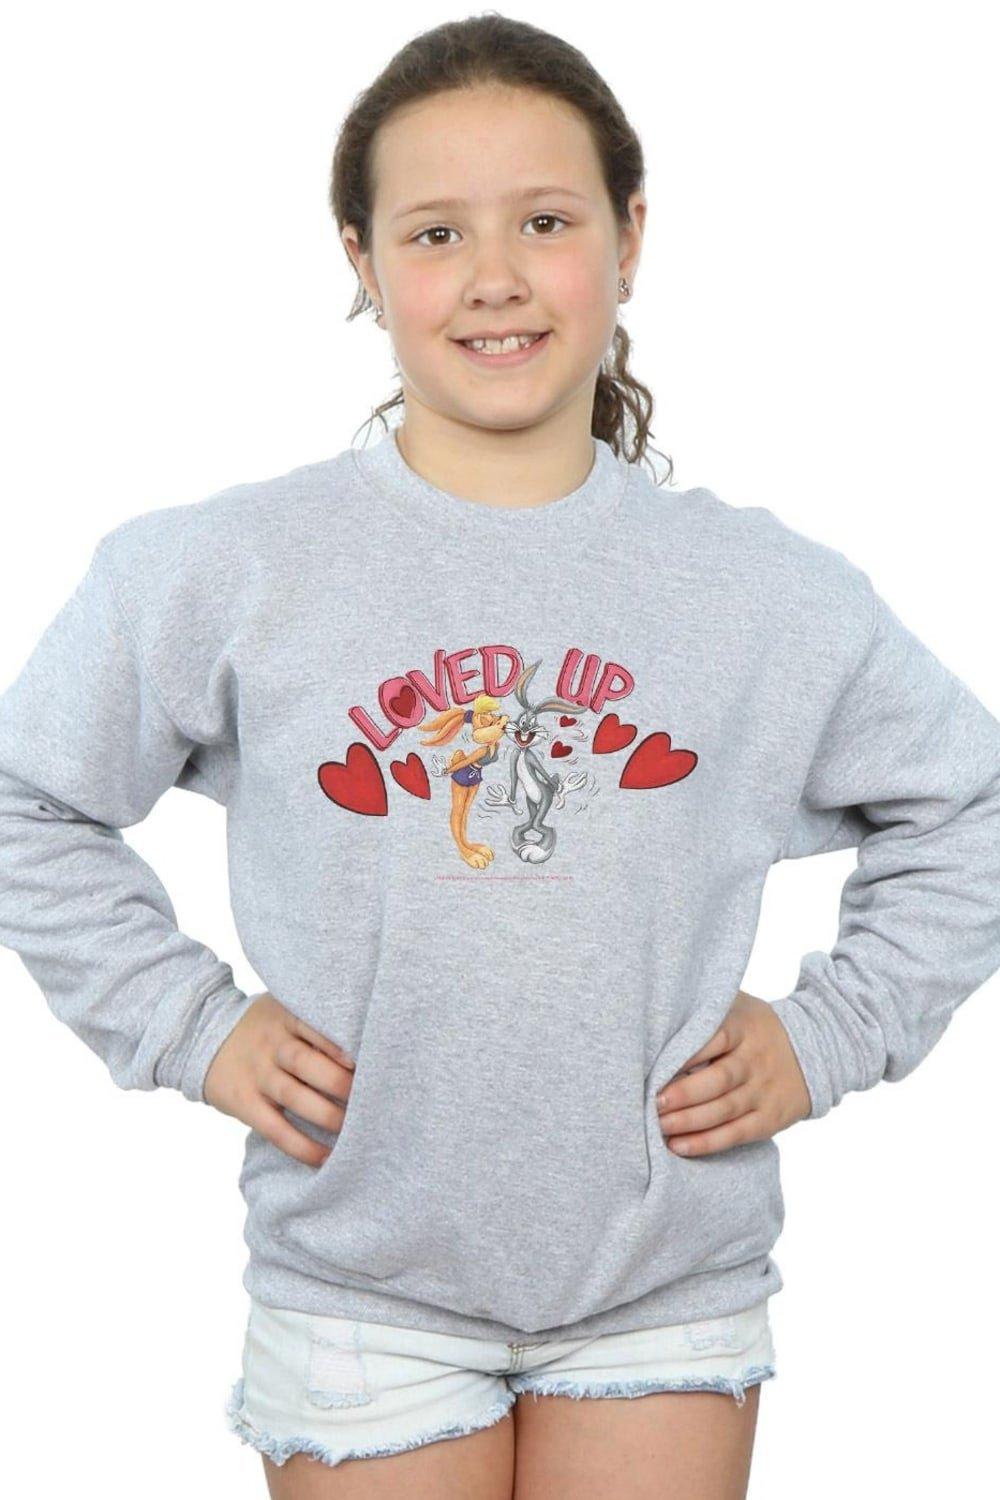 Bugs Bunny And Lola Valentine’s Day Loved Up Sweatshirt